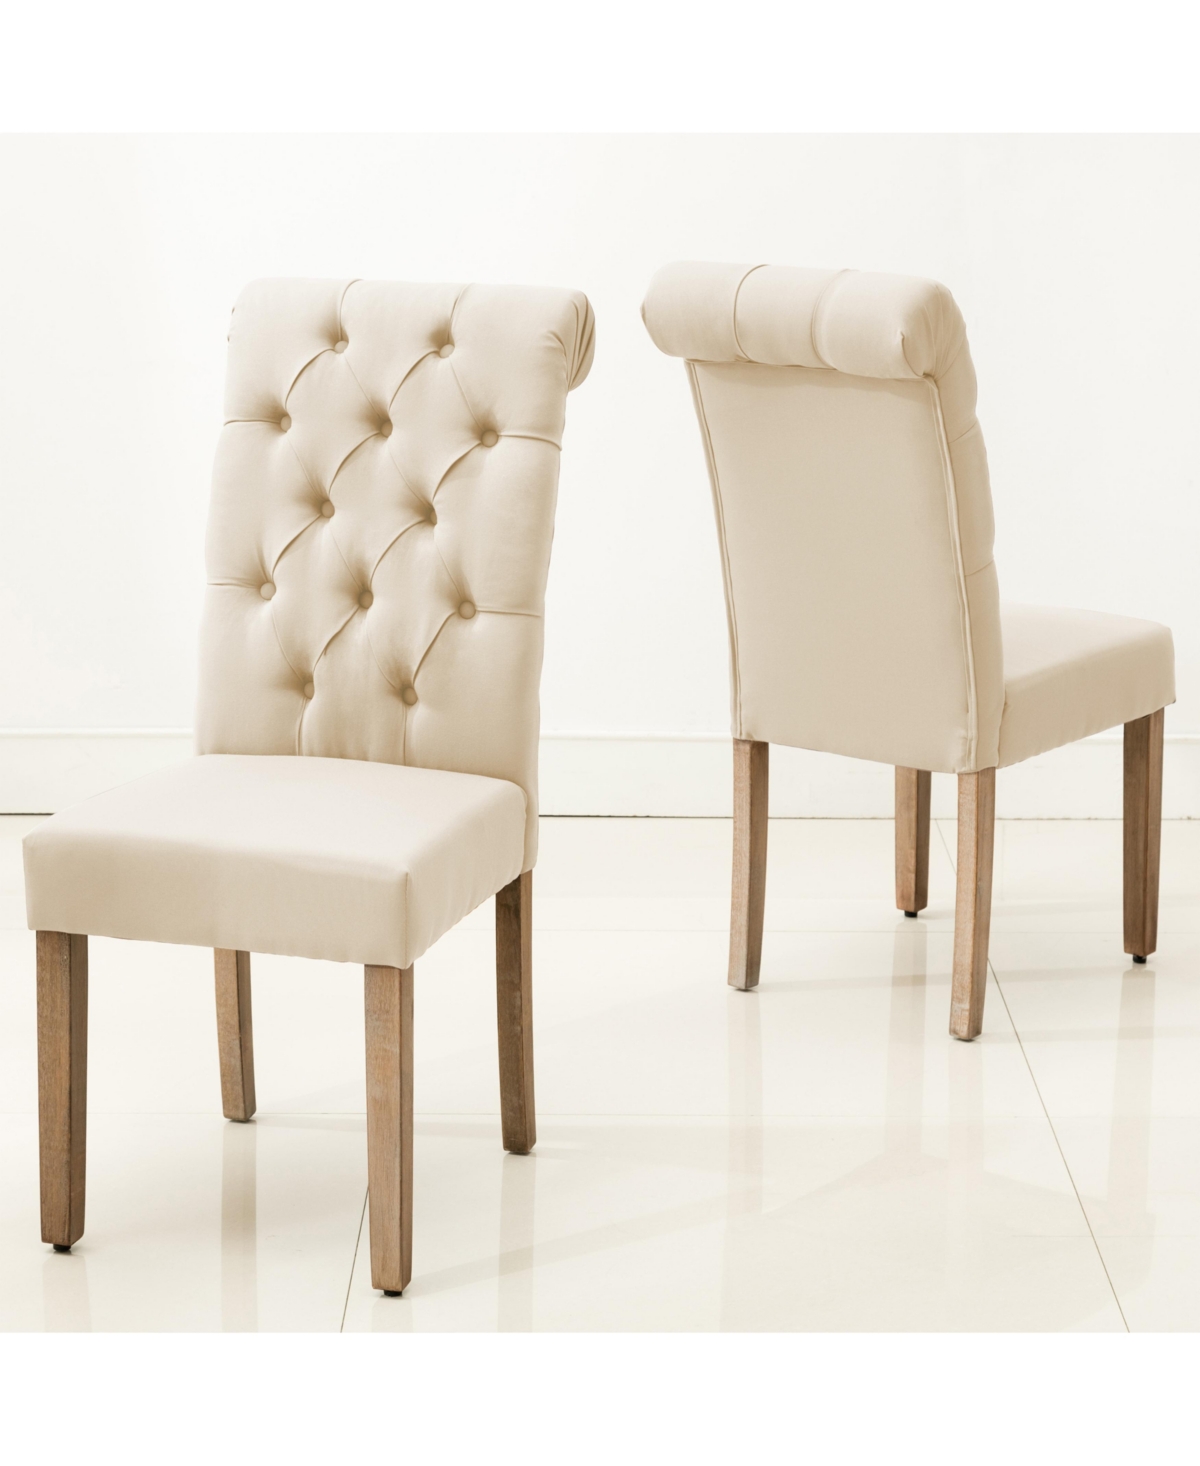 Ac Pacific Natalie Roll Top Tufted Linen Fabric Modern Dining Chair, Set of 2